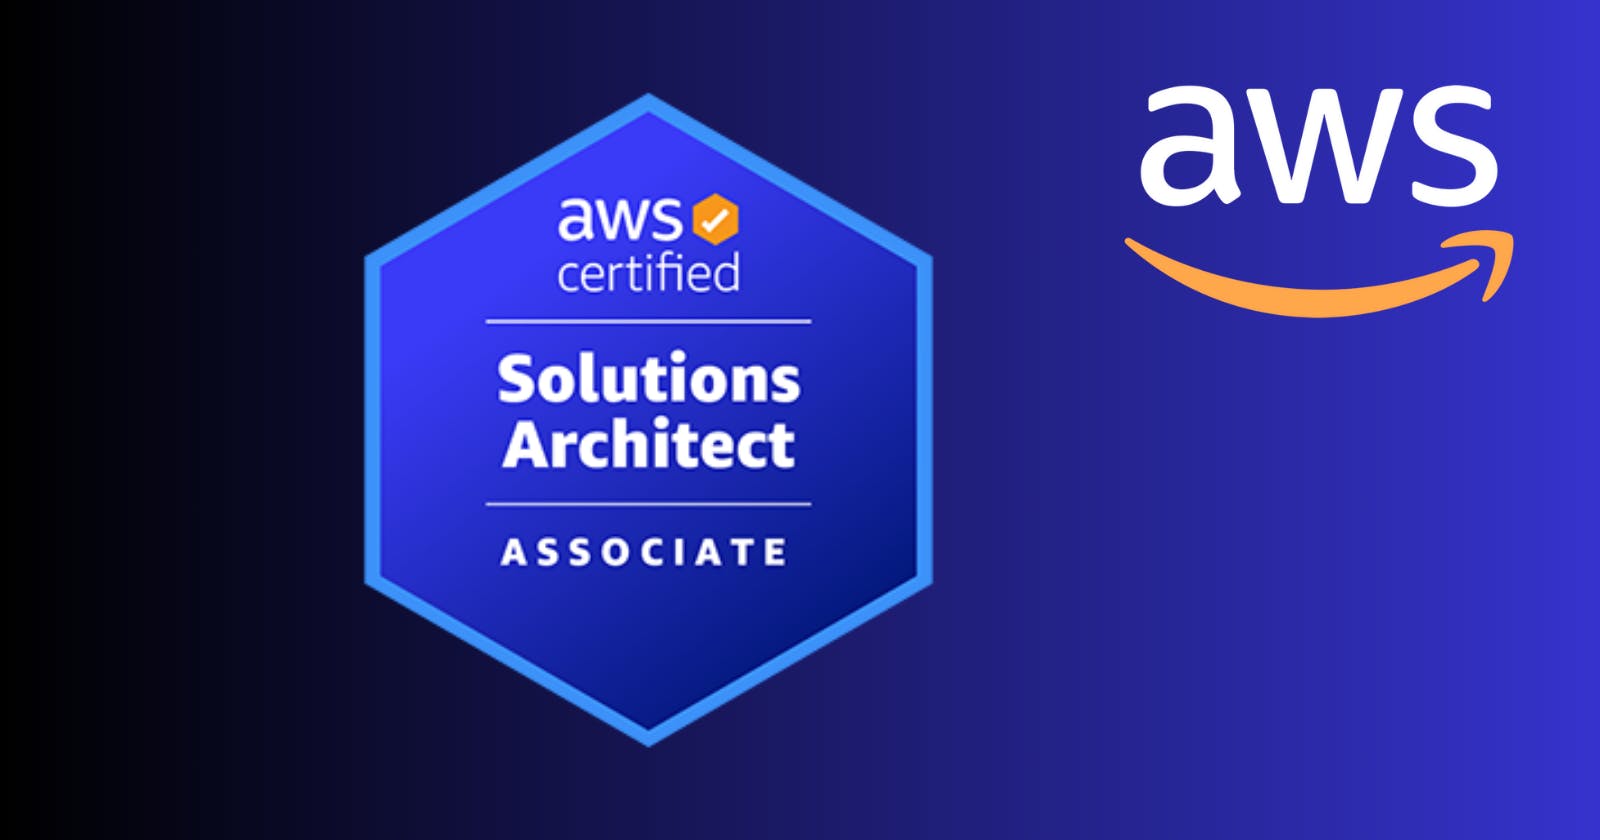 5 top topics to kickstart your journey to becoming an AWS Solutions Architect! 🌟